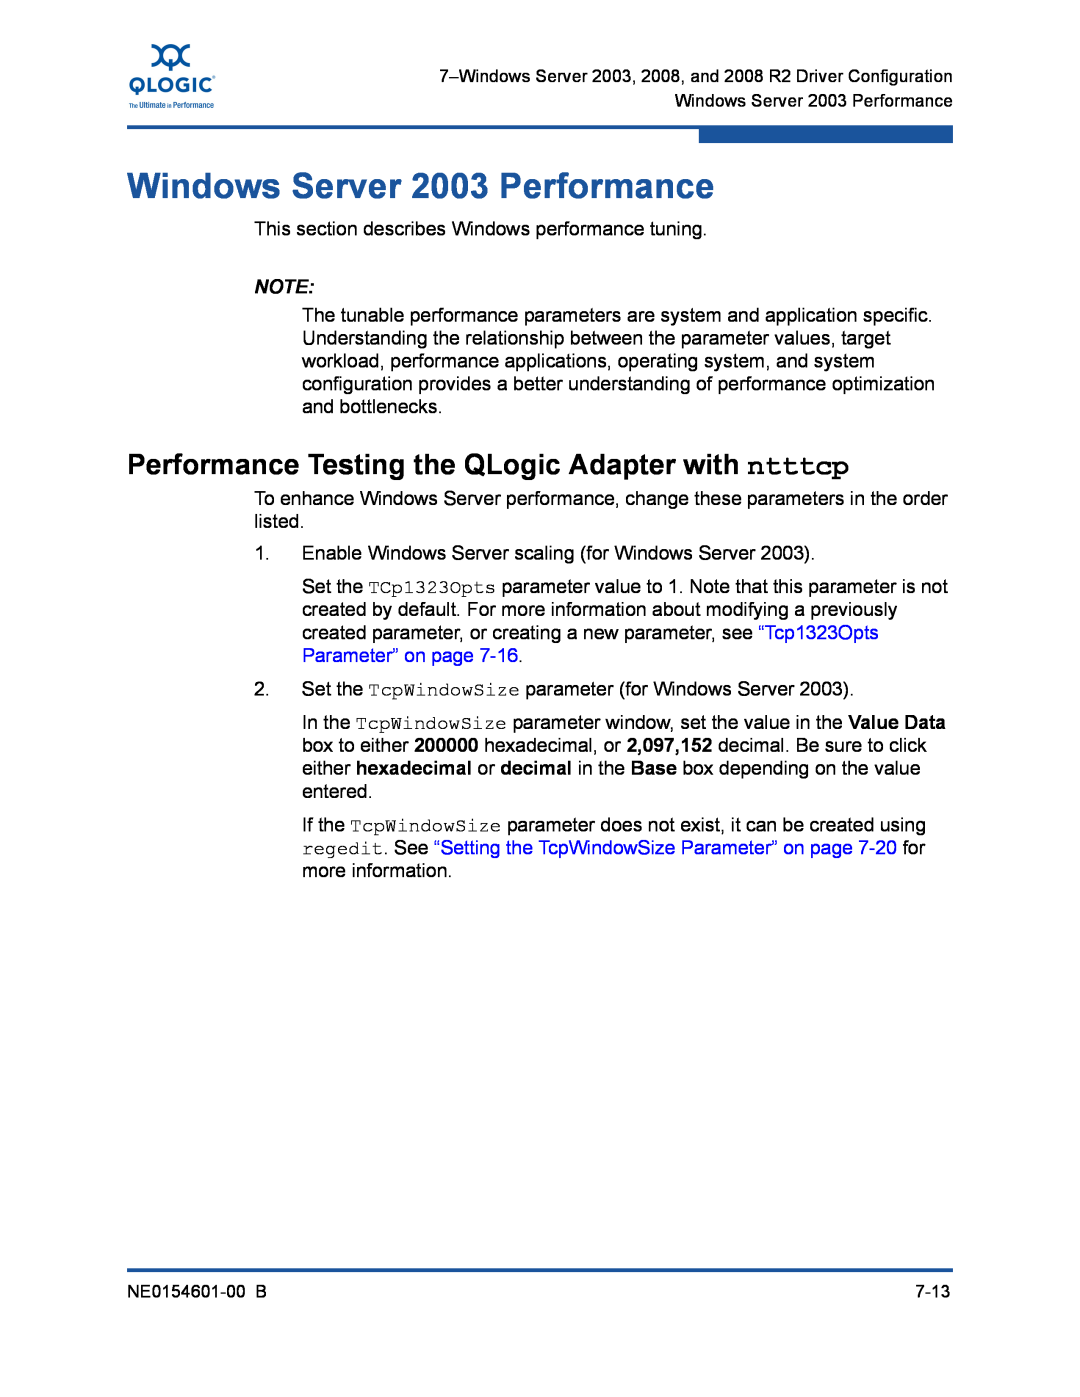 Q-Logic 3000, 3100 manual Windows Server 2003 Performance, Performance Testing the QLogic Adapter with ntttcp 